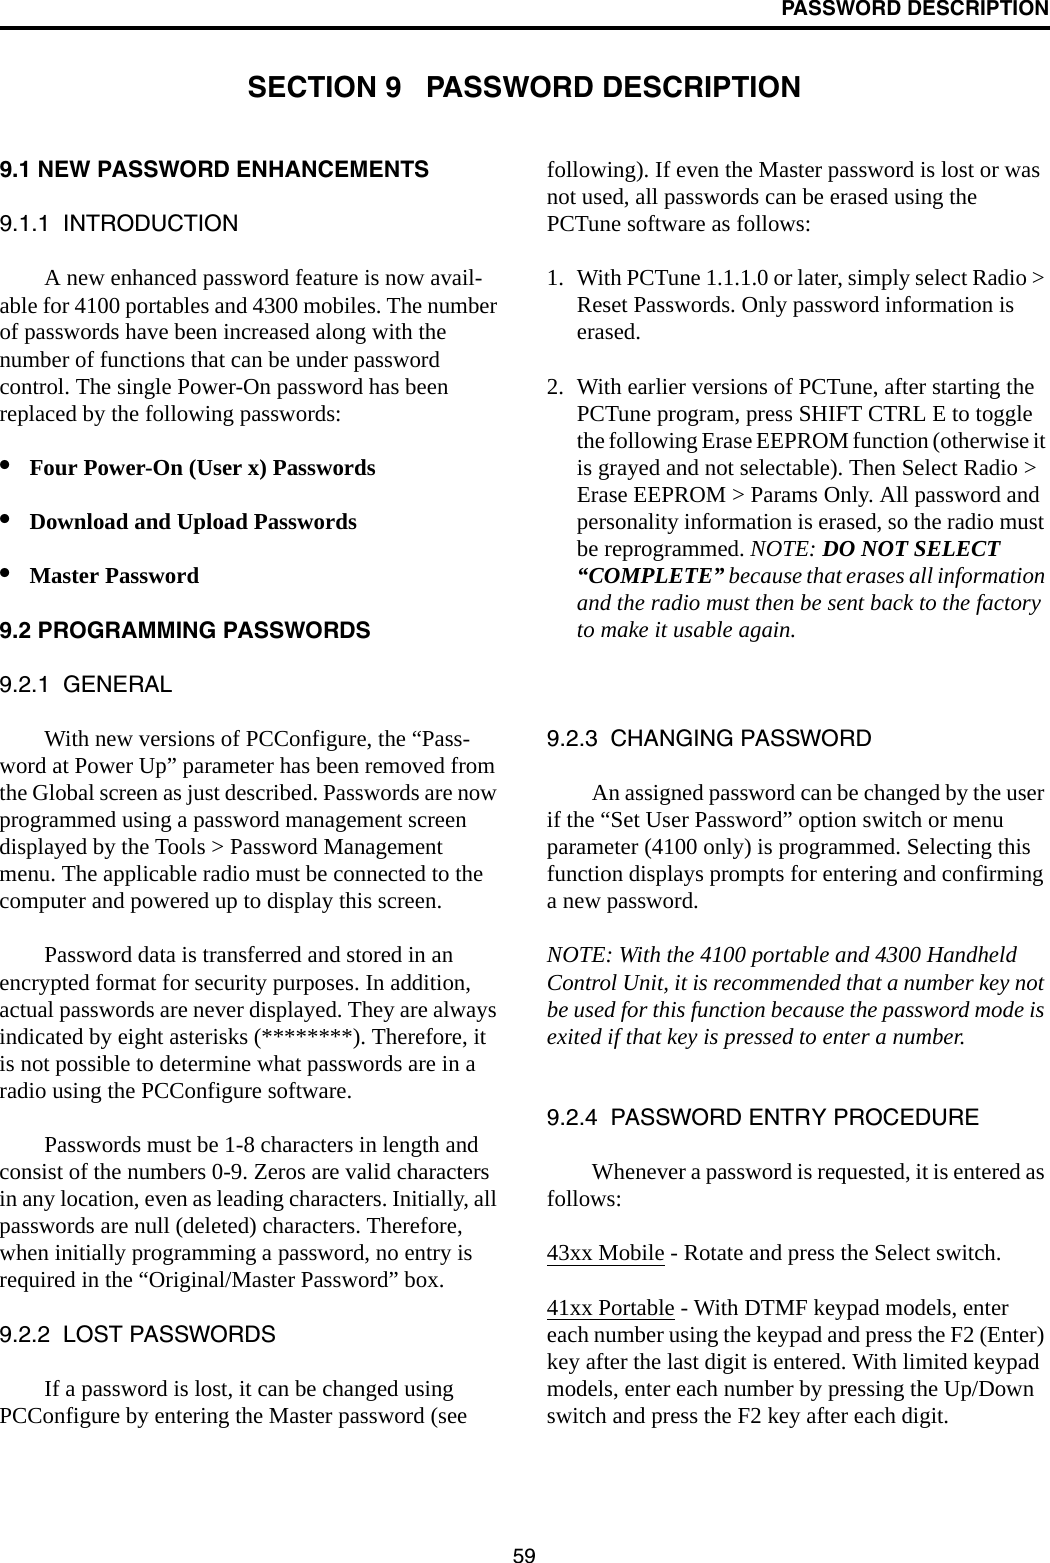 59PASSWORD DESCRIPTIONSECTION 9   PASSWORD DESCRIPTION9.1 NEW PASSWORD ENHANCEMENTS9.1.1  INTRODUCTIONA new enhanced password feature is now avail-able for 4100 portables and 4300 mobiles. The number of passwords have been increased along with the number of functions that can be under password control. The single Power-On password has been replaced by the following passwords: •Four Power-On (User x) Passwords •Download and Upload Passwords•Master Password9.2 PROGRAMMING PASSWORDS9.2.1  GENERALWith new versions of PCConfigure, the “Pass-word at Power Up” parameter has been removed from the Global screen as just described. Passwords are now programmed using a password management screen displayed by the Tools &gt; Password Management menu. The applicable radio must be connected to the computer and powered up to display this screen. Password data is transferred and stored in an encrypted format for security purposes. In addition, actual passwords are never displayed. They are always indicated by eight asterisks (********). Therefore, it is not possible to determine what passwords are in a radio using the PCConfigure software.Passwords must be 1-8 characters in length and consist of the numbers 0-9. Zeros are valid characters in any location, even as leading characters. Initially, all passwords are null (deleted) characters. Therefore, when initially programming a password, no entry is required in the “Original/Master Password” box.9.2.2  LOST PASSWORDSIf a password is lost, it can be changed using PCConfigure by entering the Master password (see following). If even the Master password is lost or was not used, all passwords can be erased using the PCTune software as follows:1. With PCTune 1.1.1.0 or later, simply select Radio &gt; Reset Passwords. Only password information is erased. 2. With earlier versions of PCTune, after starting the PCTune program, press SHIFT CTRL E to toggle the following Erase EEPROM function (otherwise it is grayed and not selectable). Then Select Radio &gt; Erase EEPROM &gt; Params Only. All password and personality information is erased, so the radio must be reprogrammed. NOTE: DO NOT SELECT “COMPLETE” because that erases all information and the radio must then be sent back to the factory to make it usable again.9.2.3  CHANGING PASSWORDAn assigned password can be changed by the user if the “Set User Password” option switch or menu parameter (4100 only) is programmed. Selecting this function displays prompts for entering and confirming a new password. NOTE: With the 4100 portable and 4300 Handheld Control Unit, it is recommended that a number key not be used for this function because the password mode is exited if that key is pressed to enter a number.9.2.4  PASSWORD ENTRY PROCEDUREWhenever a password is requested, it is entered as follows:43xx Mobile - Rotate and press the Select switch.41xx Portable - With DTMF keypad models, enter each number using the keypad and press the F2 (Enter) key after the last digit is entered. With limited keypad models, enter each number by pressing the Up/Down switch and press the F2 key after each digit.